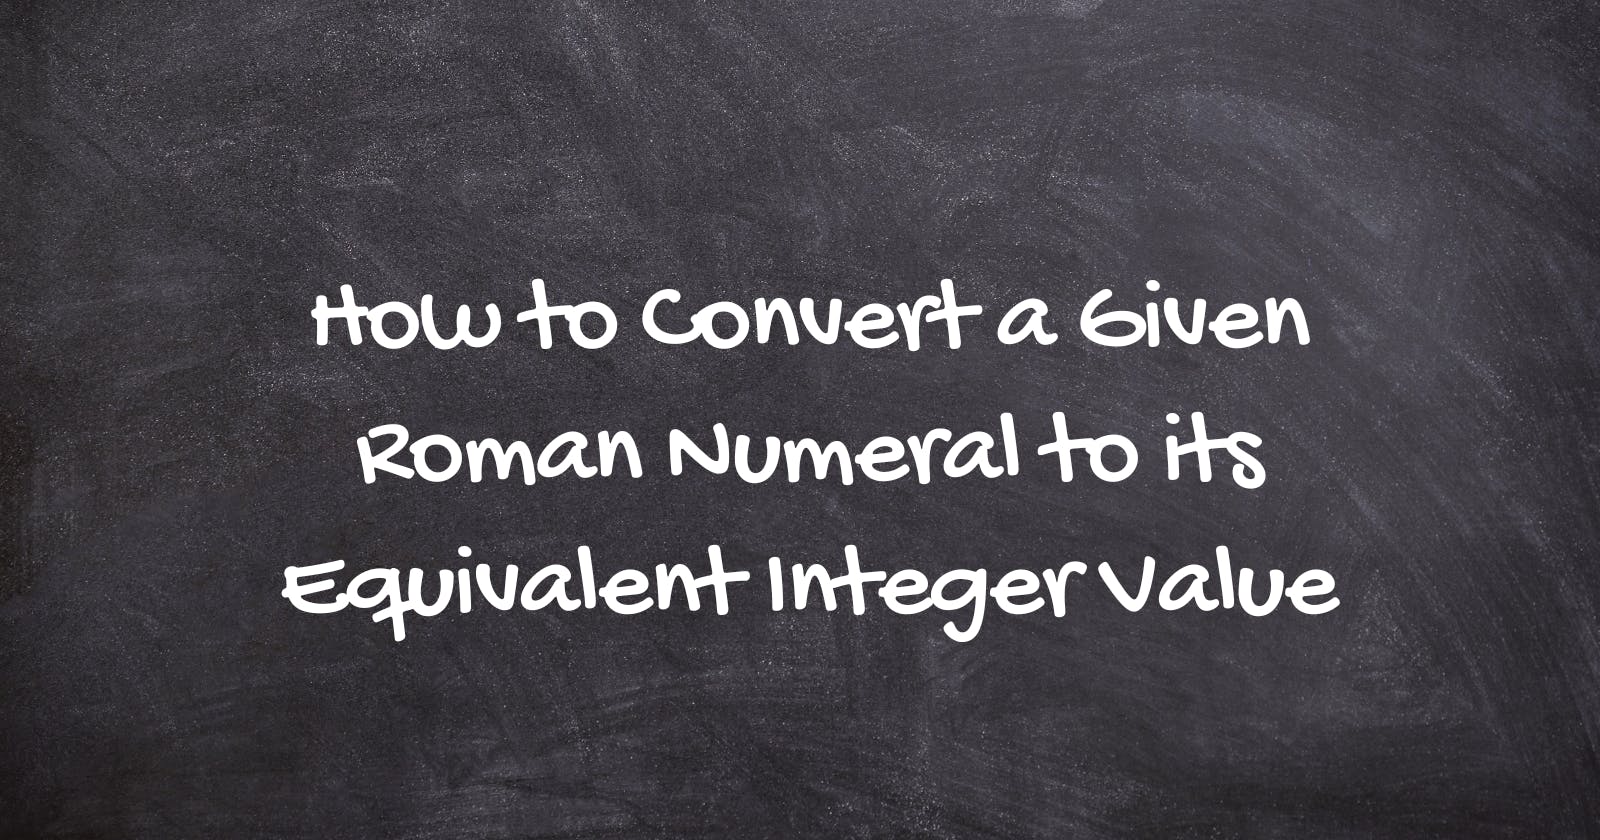 How to Convert a Given Roman Numeral to its Equivalent Integer Value